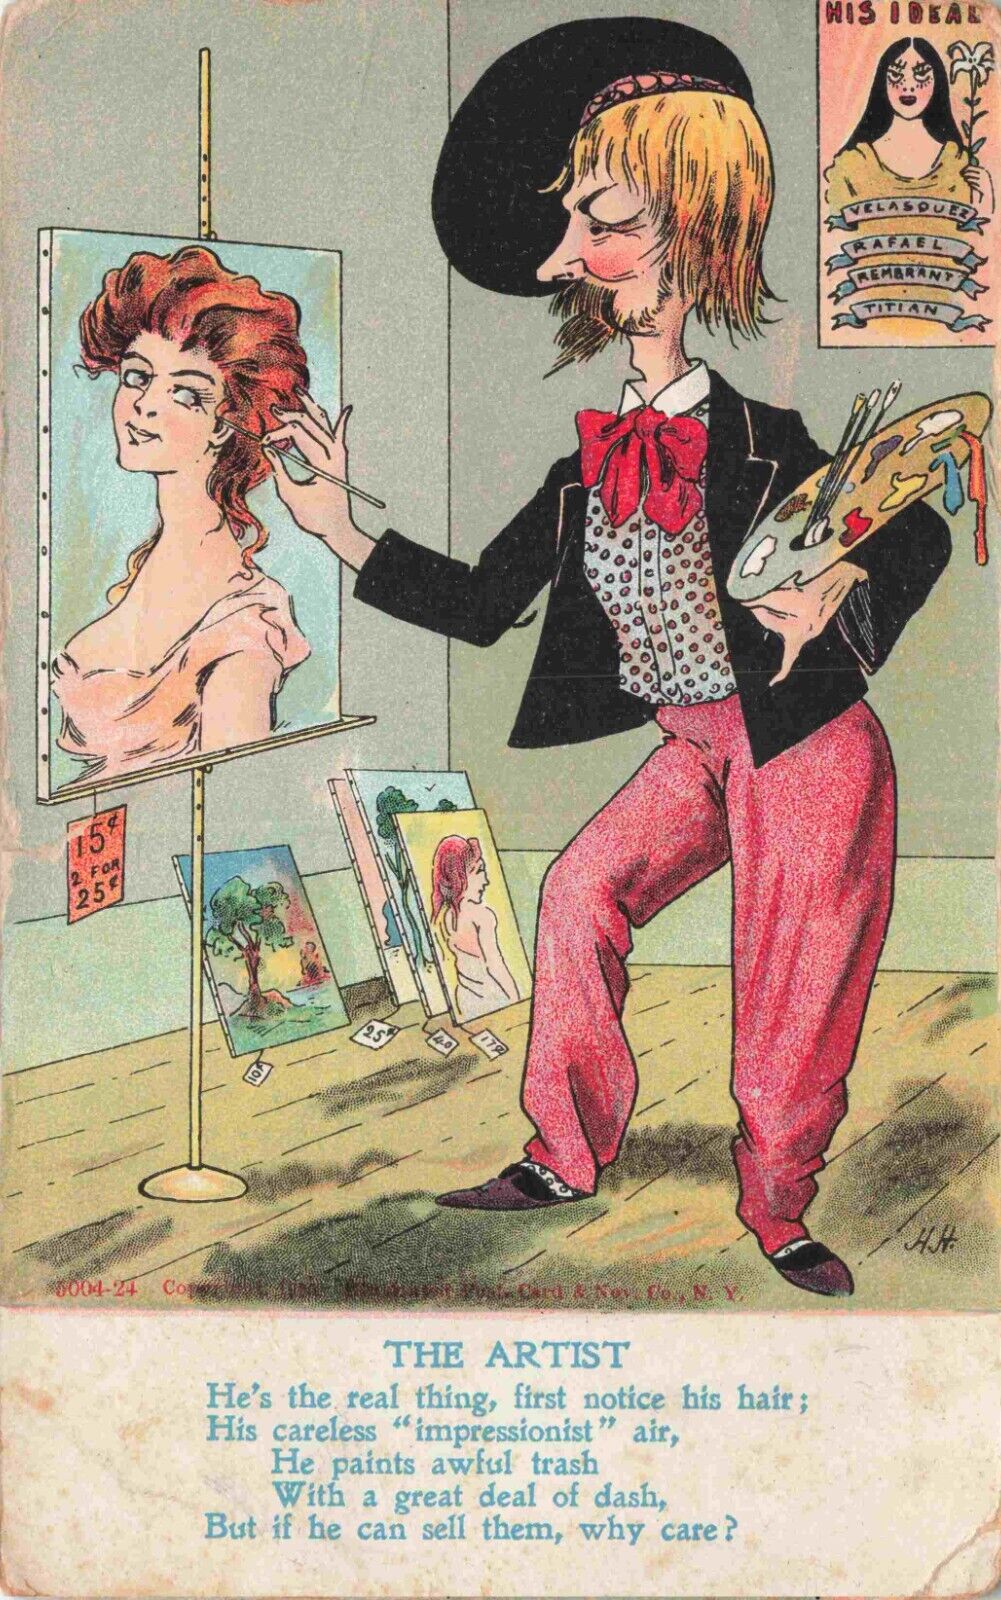 Comic The Artist Paintings for Sale Stylish Goatee by Hermann Hanke Postcard